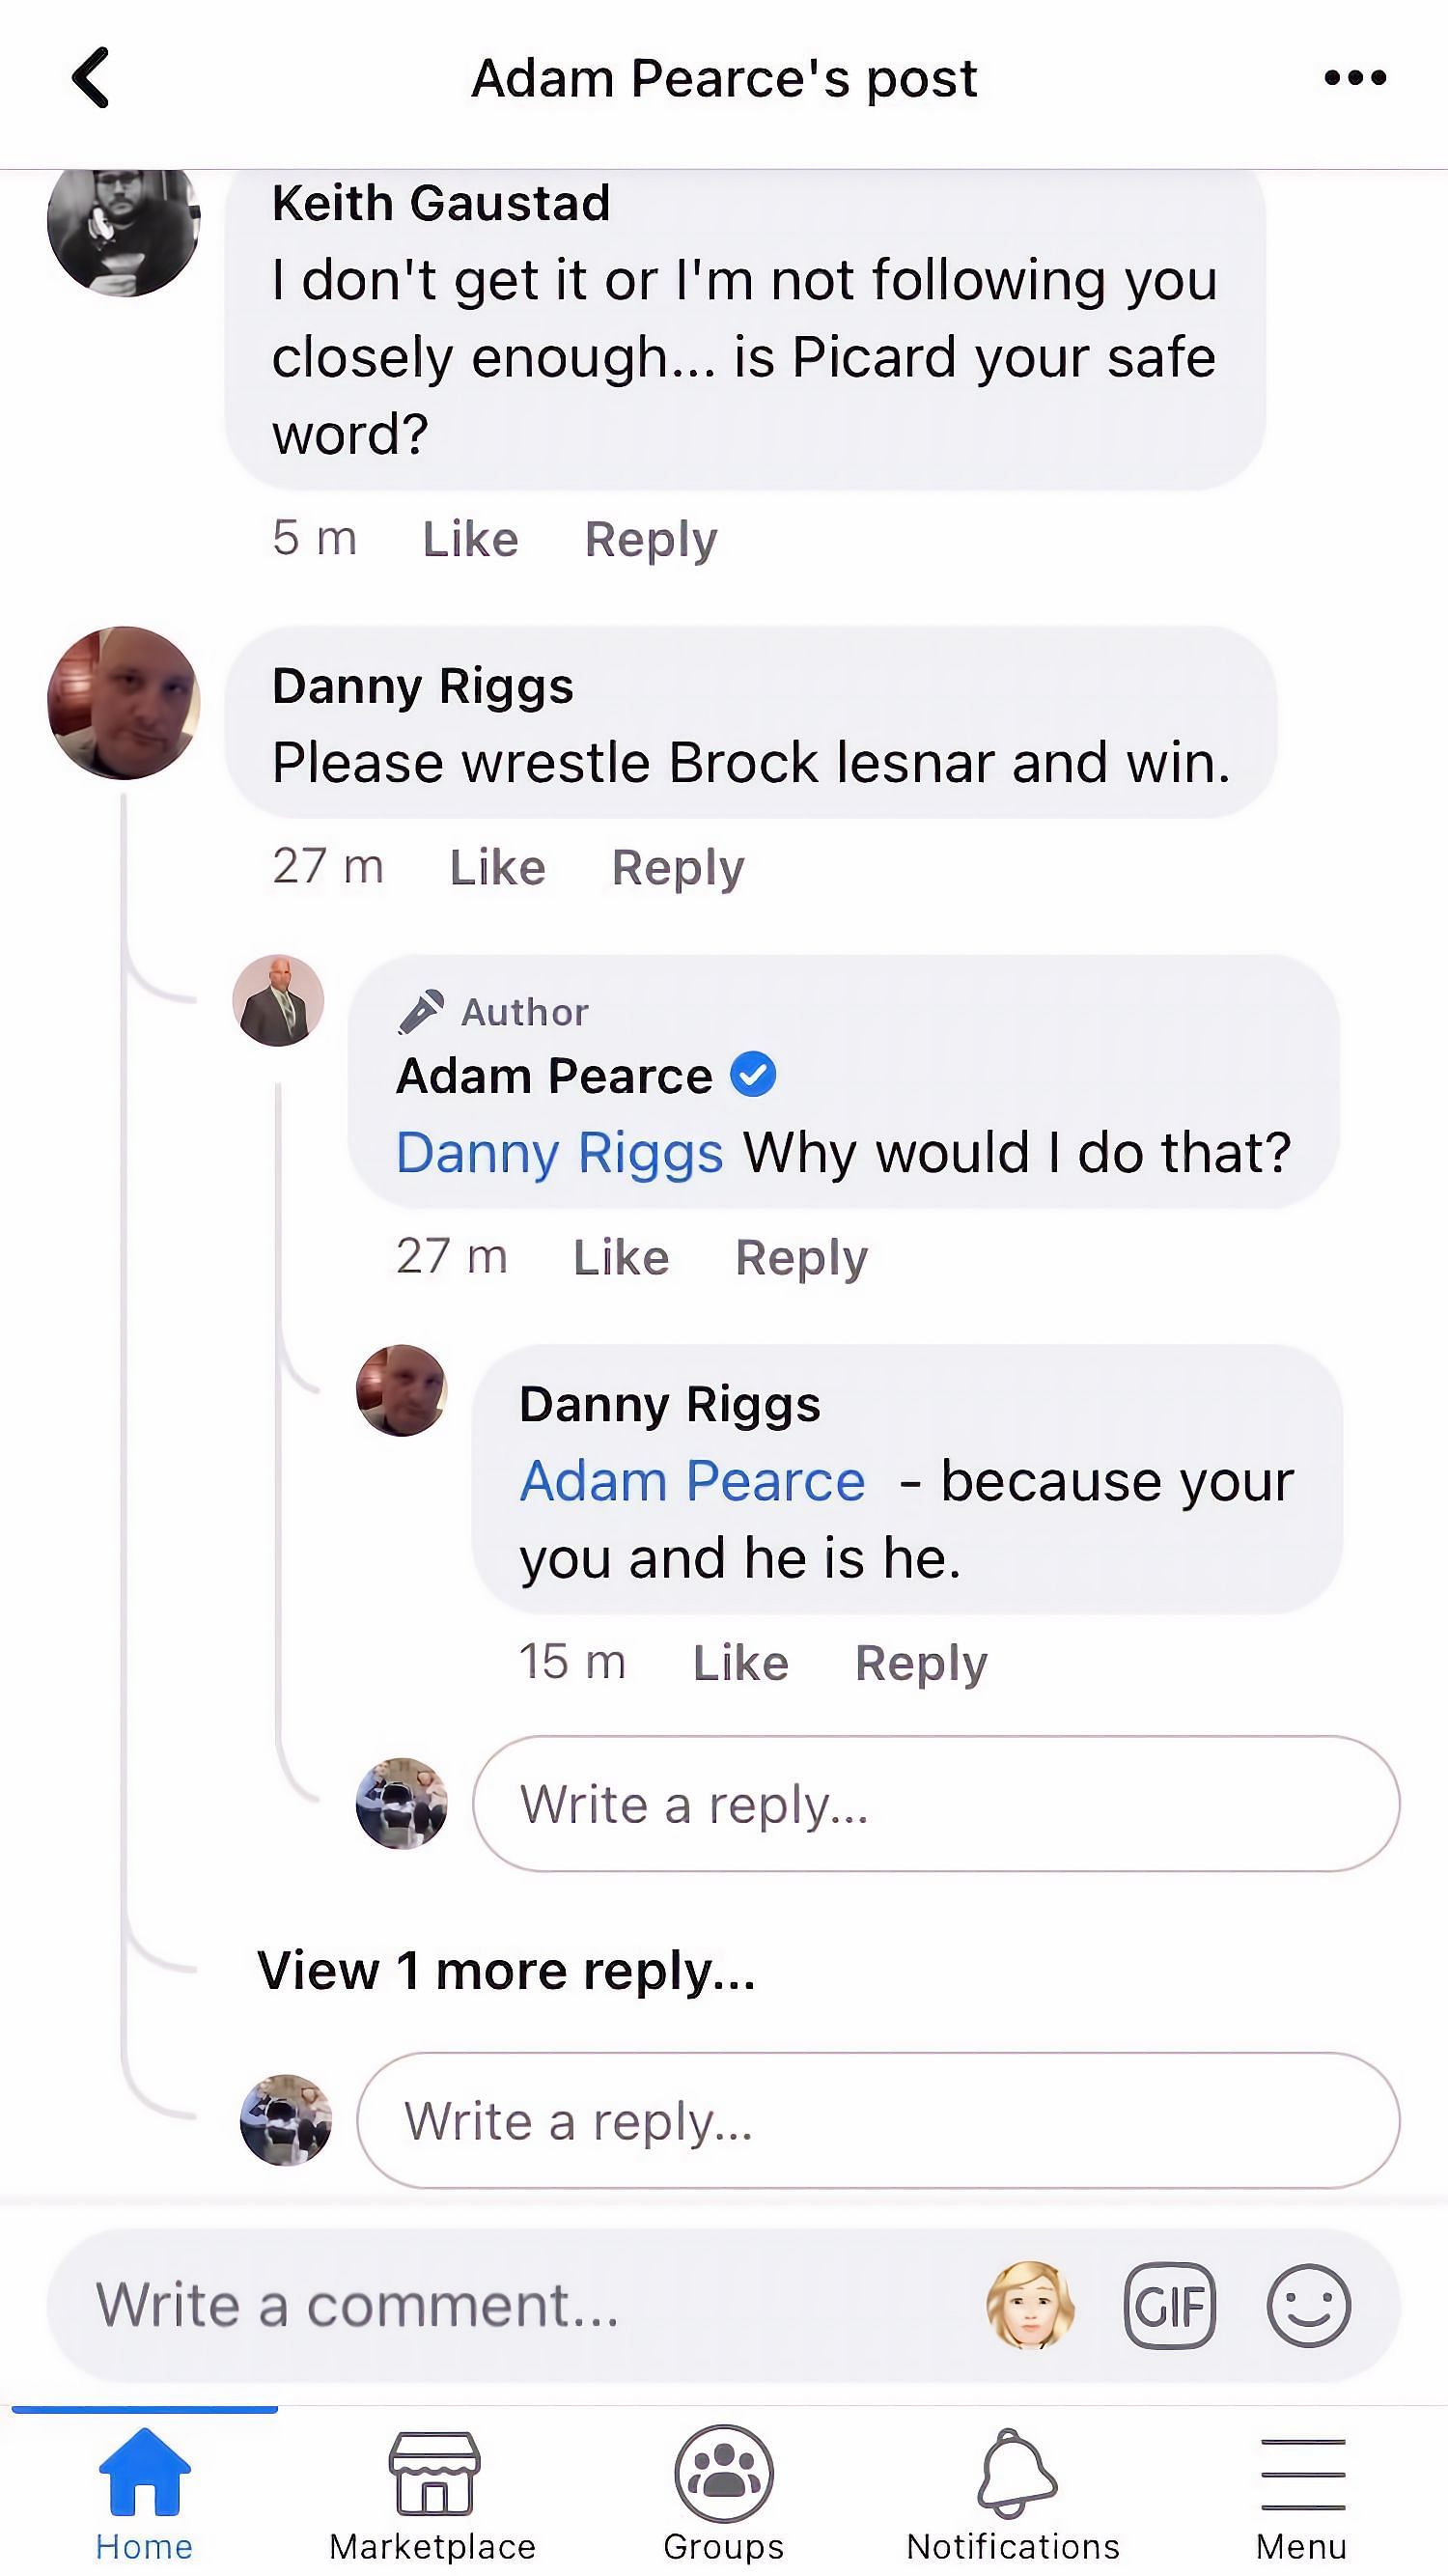 The conversation between a fan and Adam Pearce